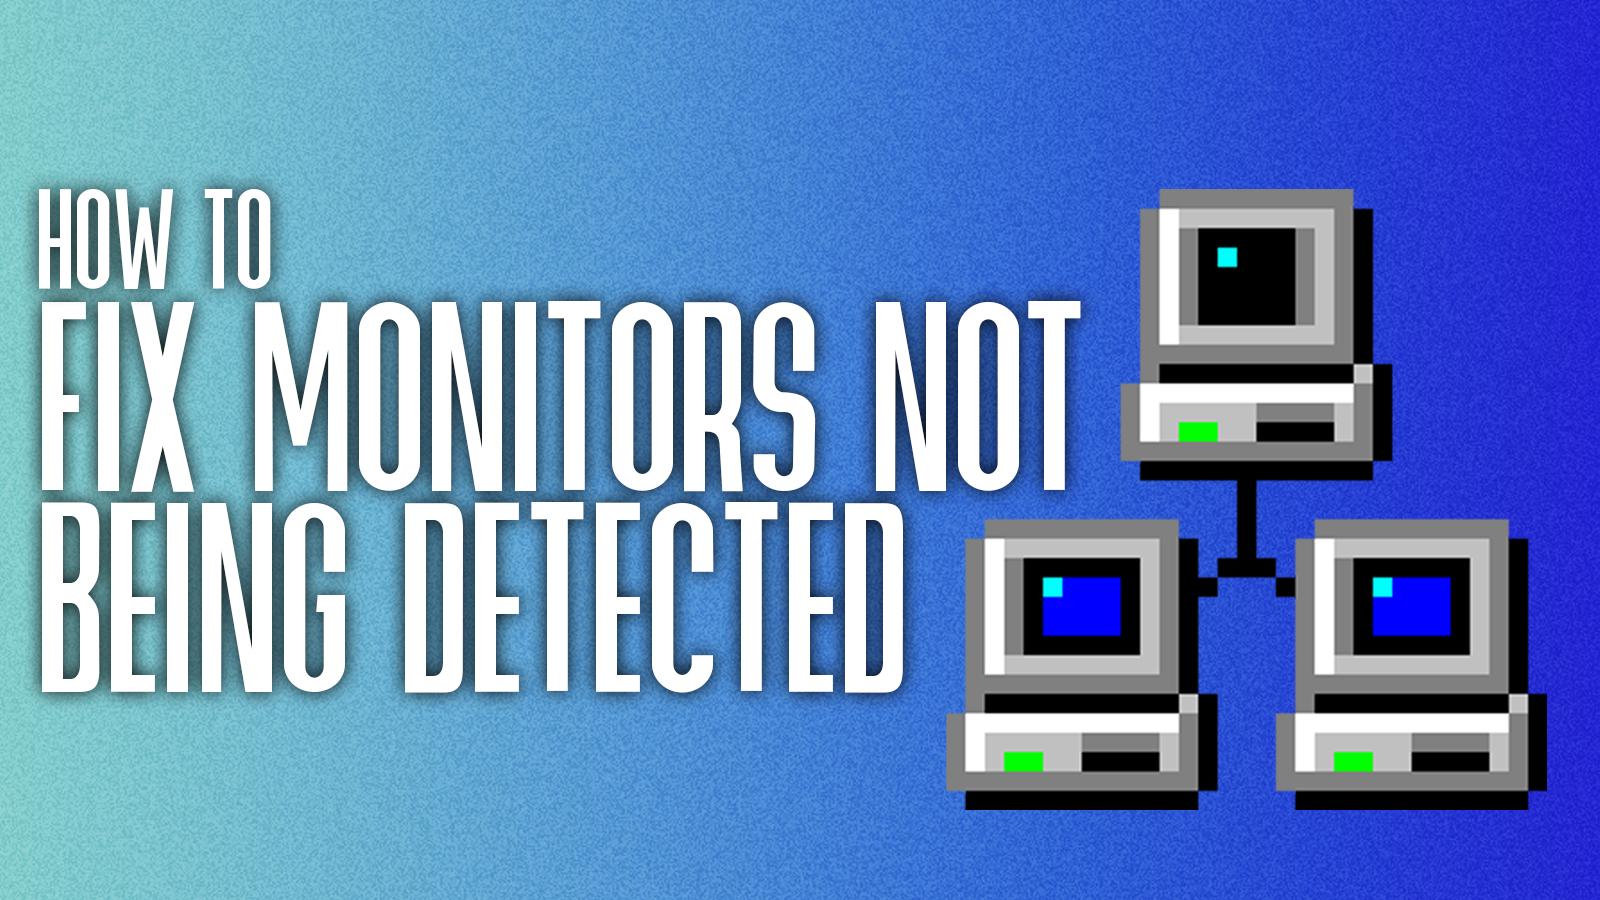 How to fix monitors not being detected